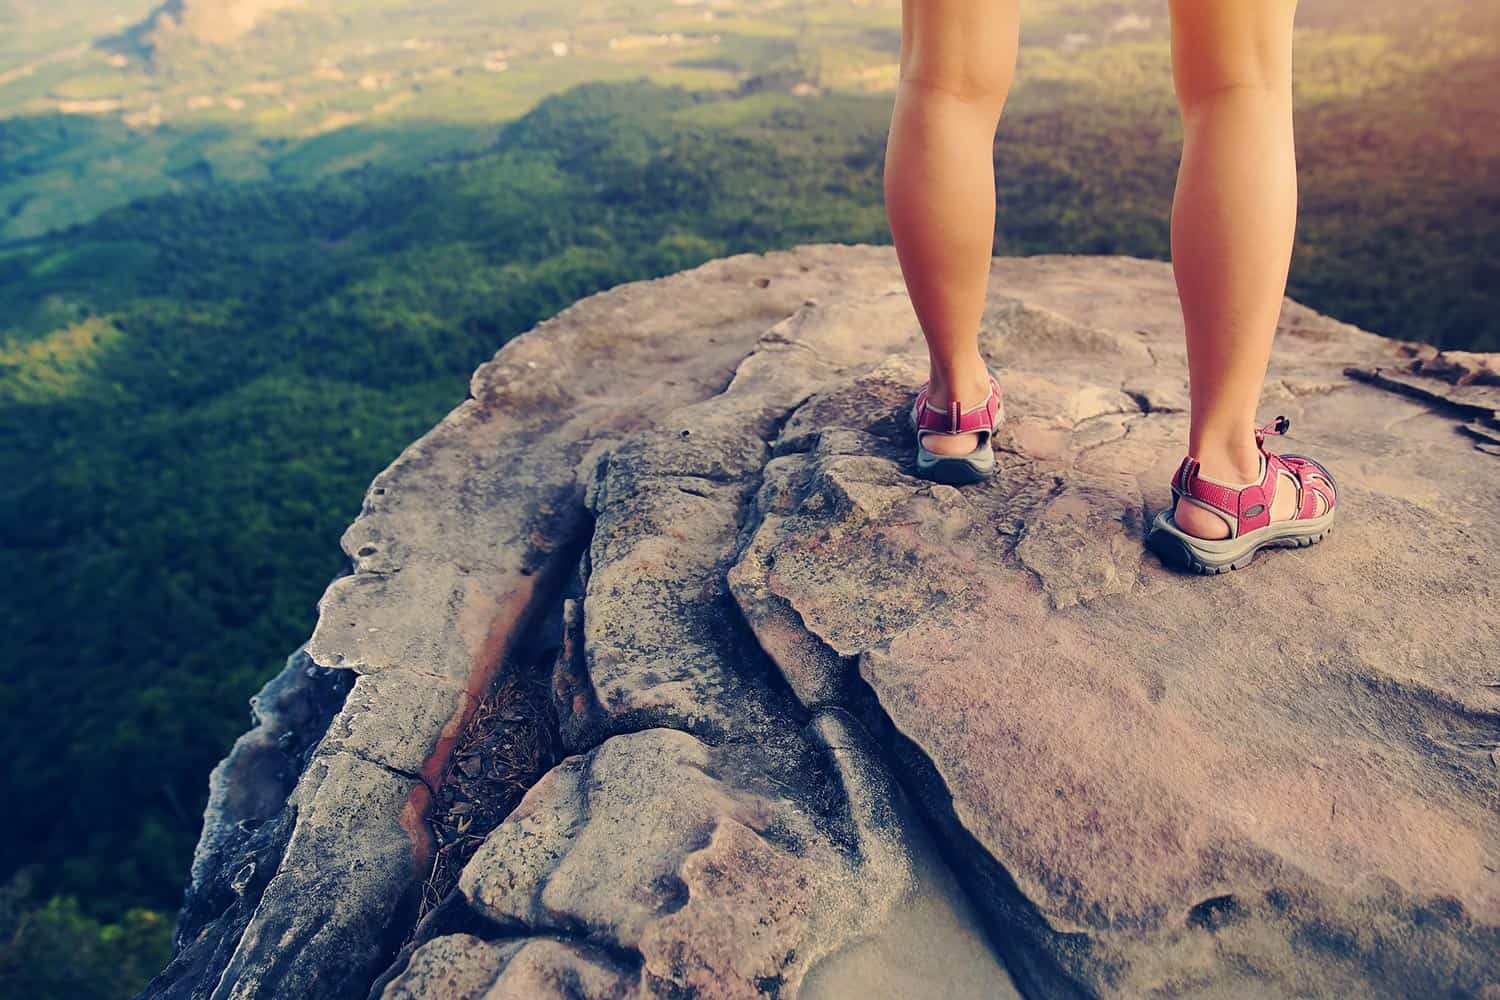 best sandals for hiking women's